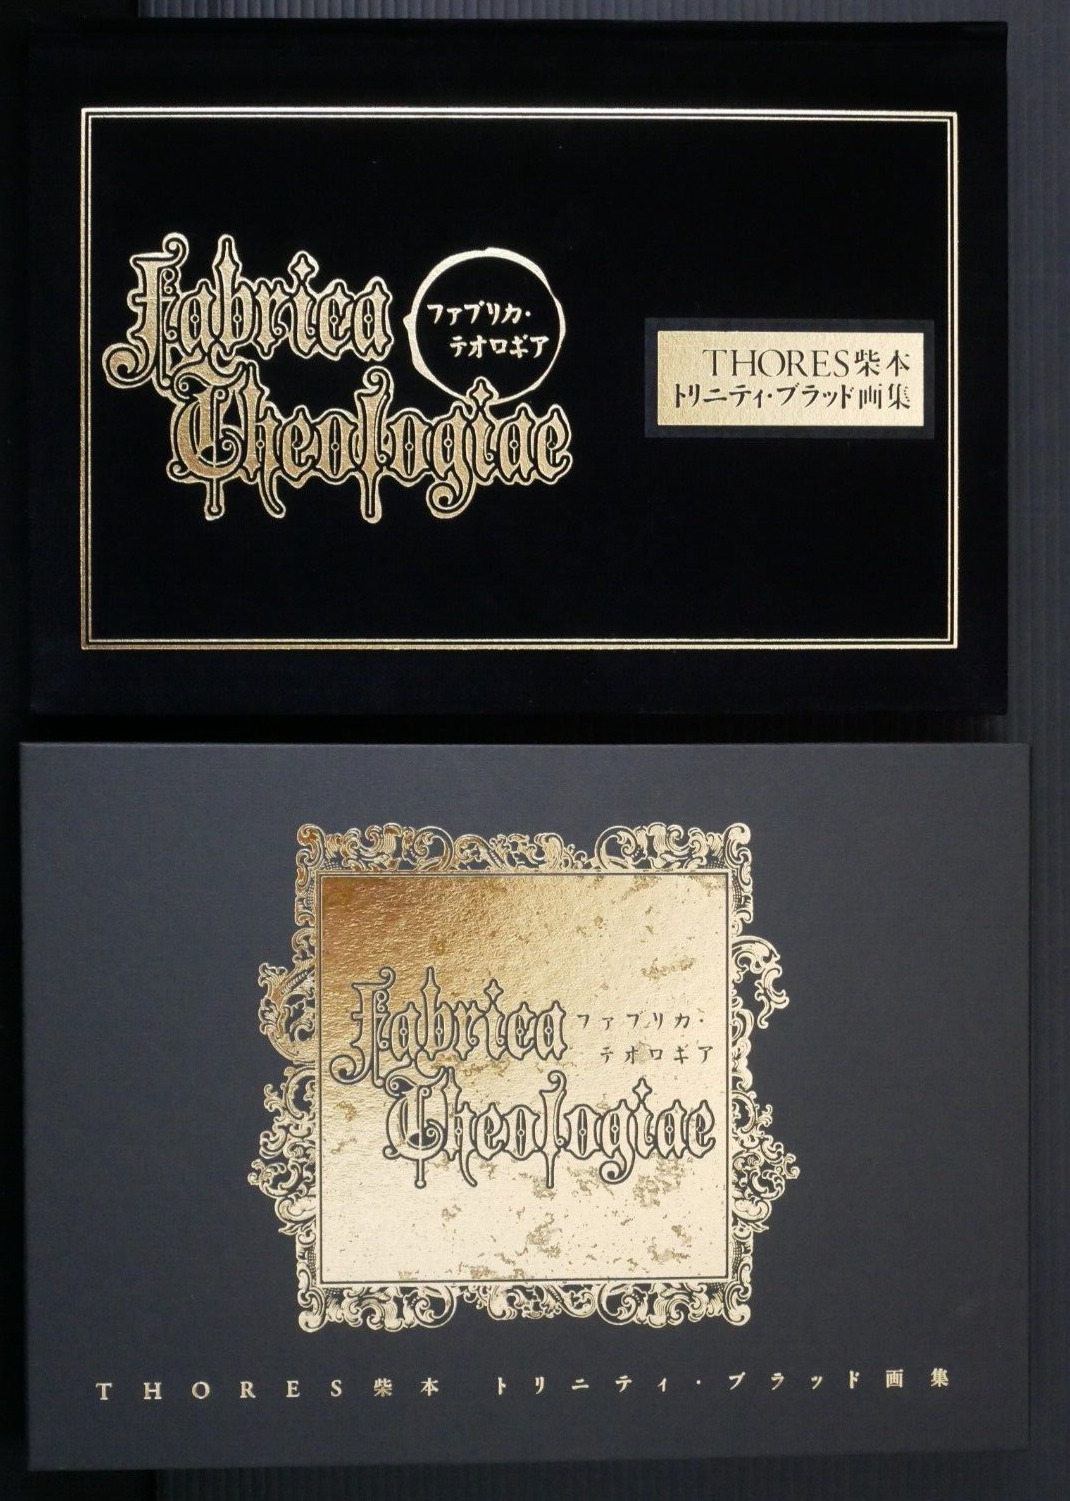 Trinity Blood Art Book: fabrica theologiae by Thores Shibamoto from JAPAN